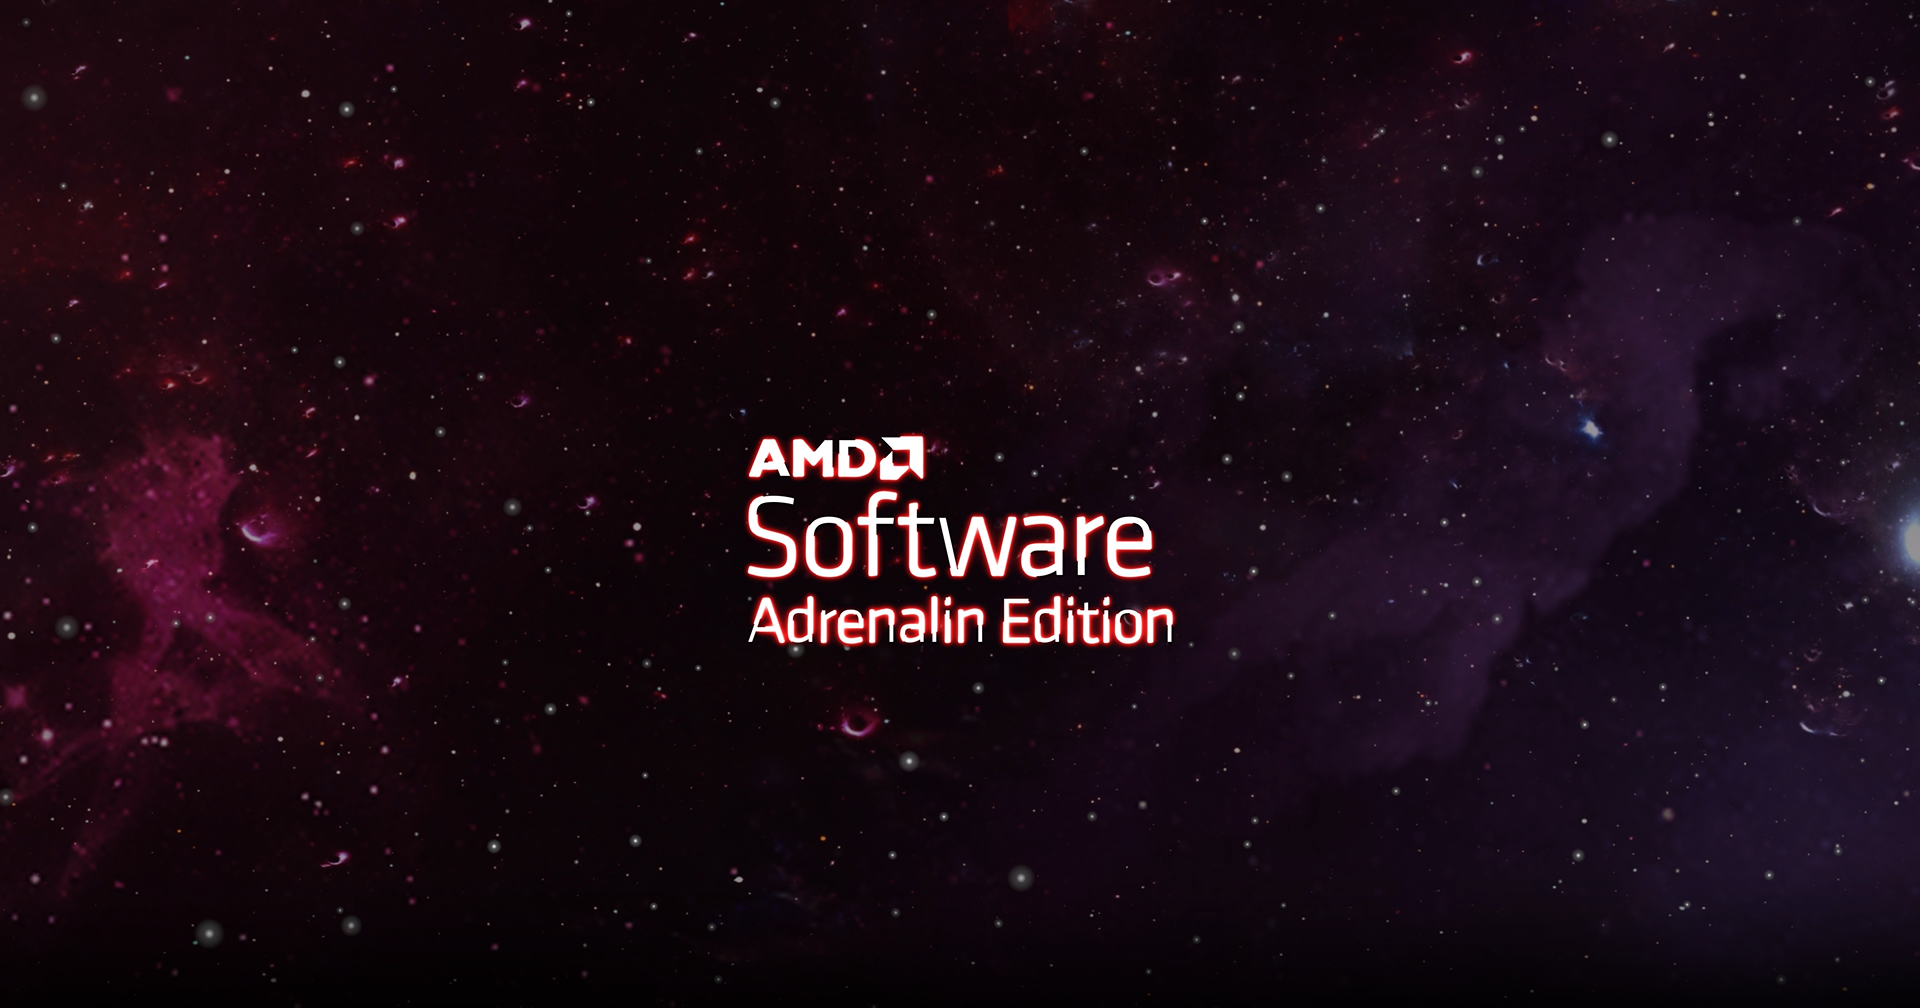 AMD Software: Adrenalin Edition Update 23.2.1 Rolled Out